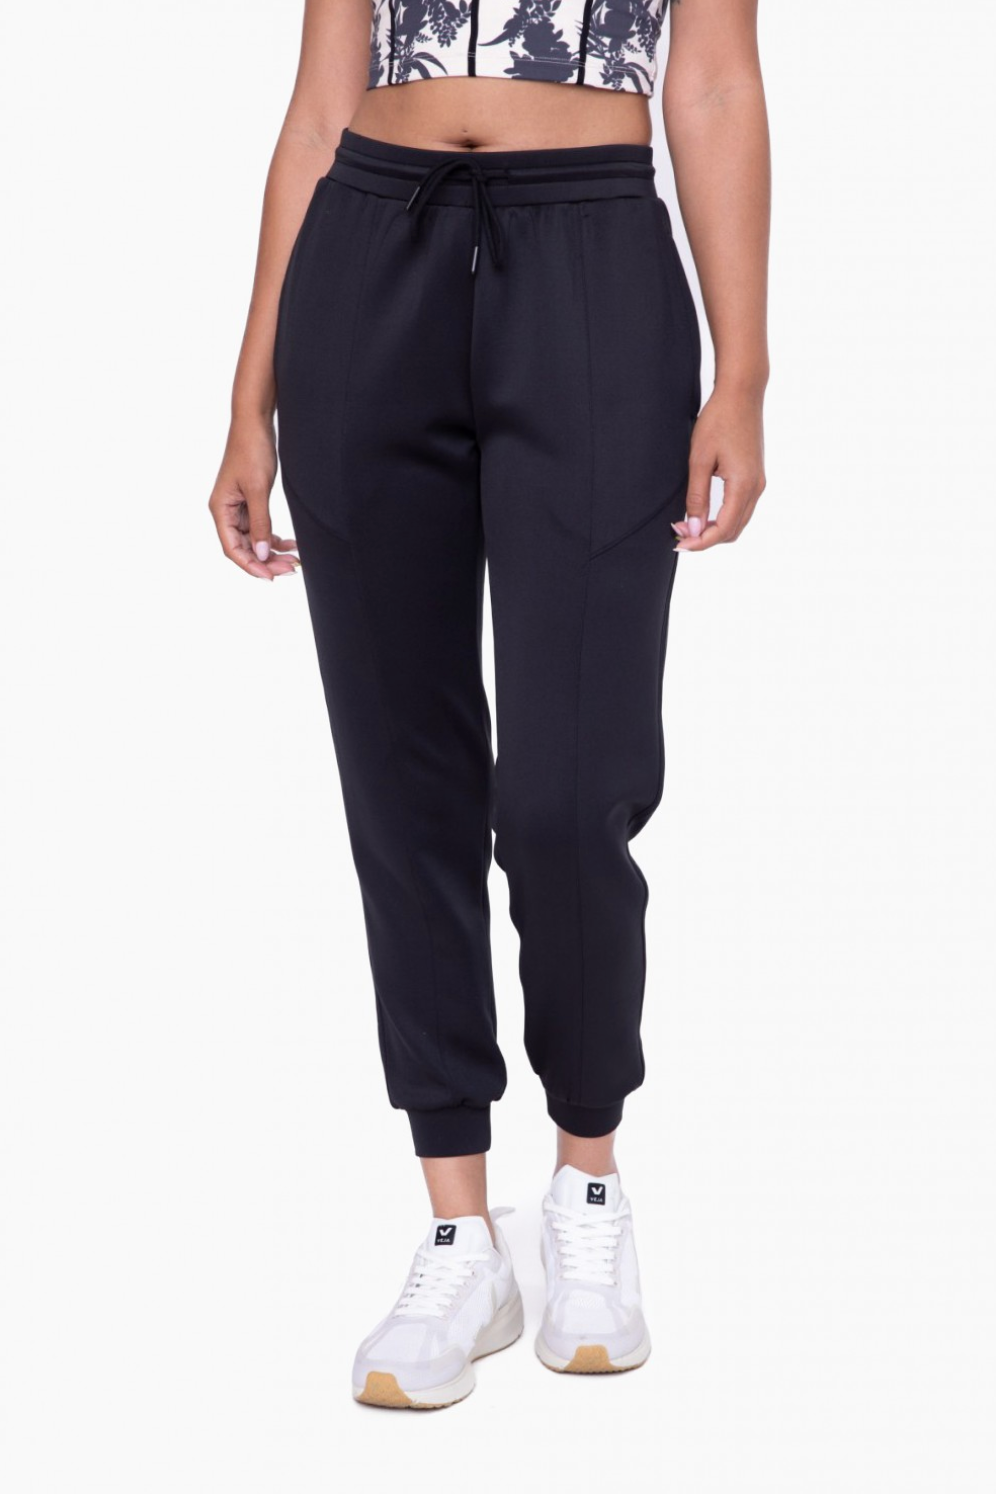 Cuffed Joggers with Zippered Pockets